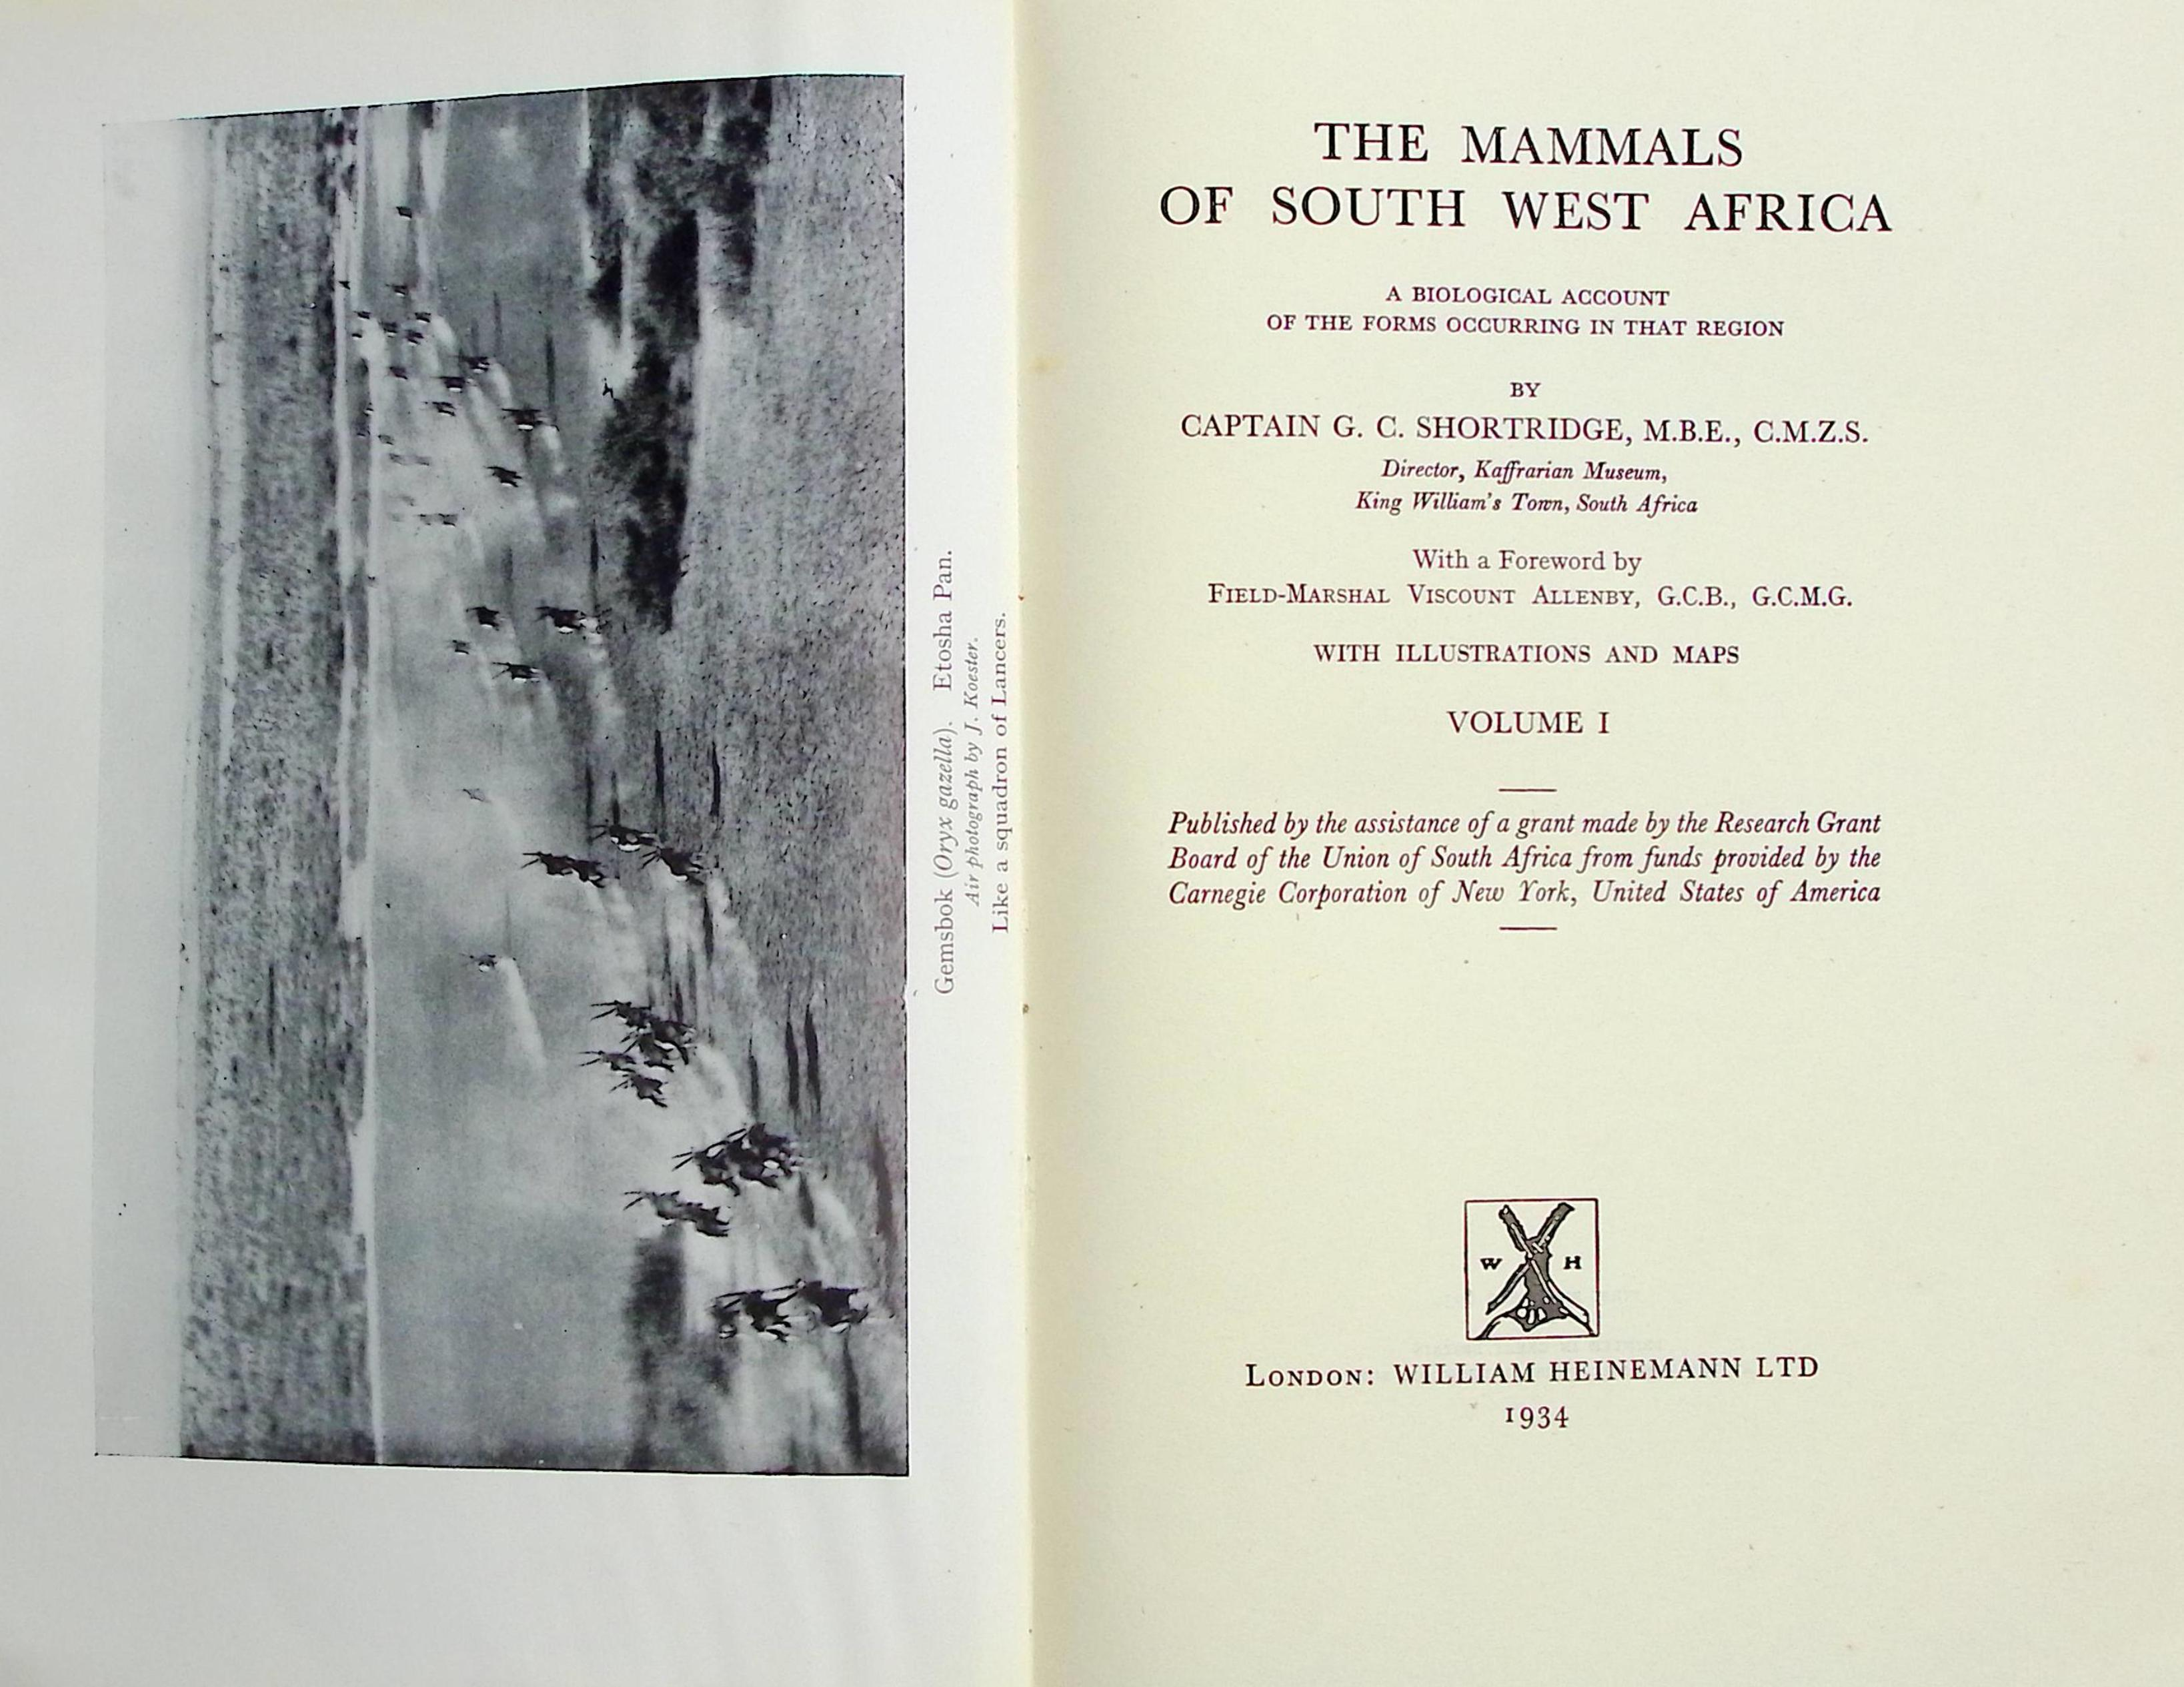 The Mammals of South West Africa. A Biological Account of the Forms Ocurring in that Region. Two volume set.